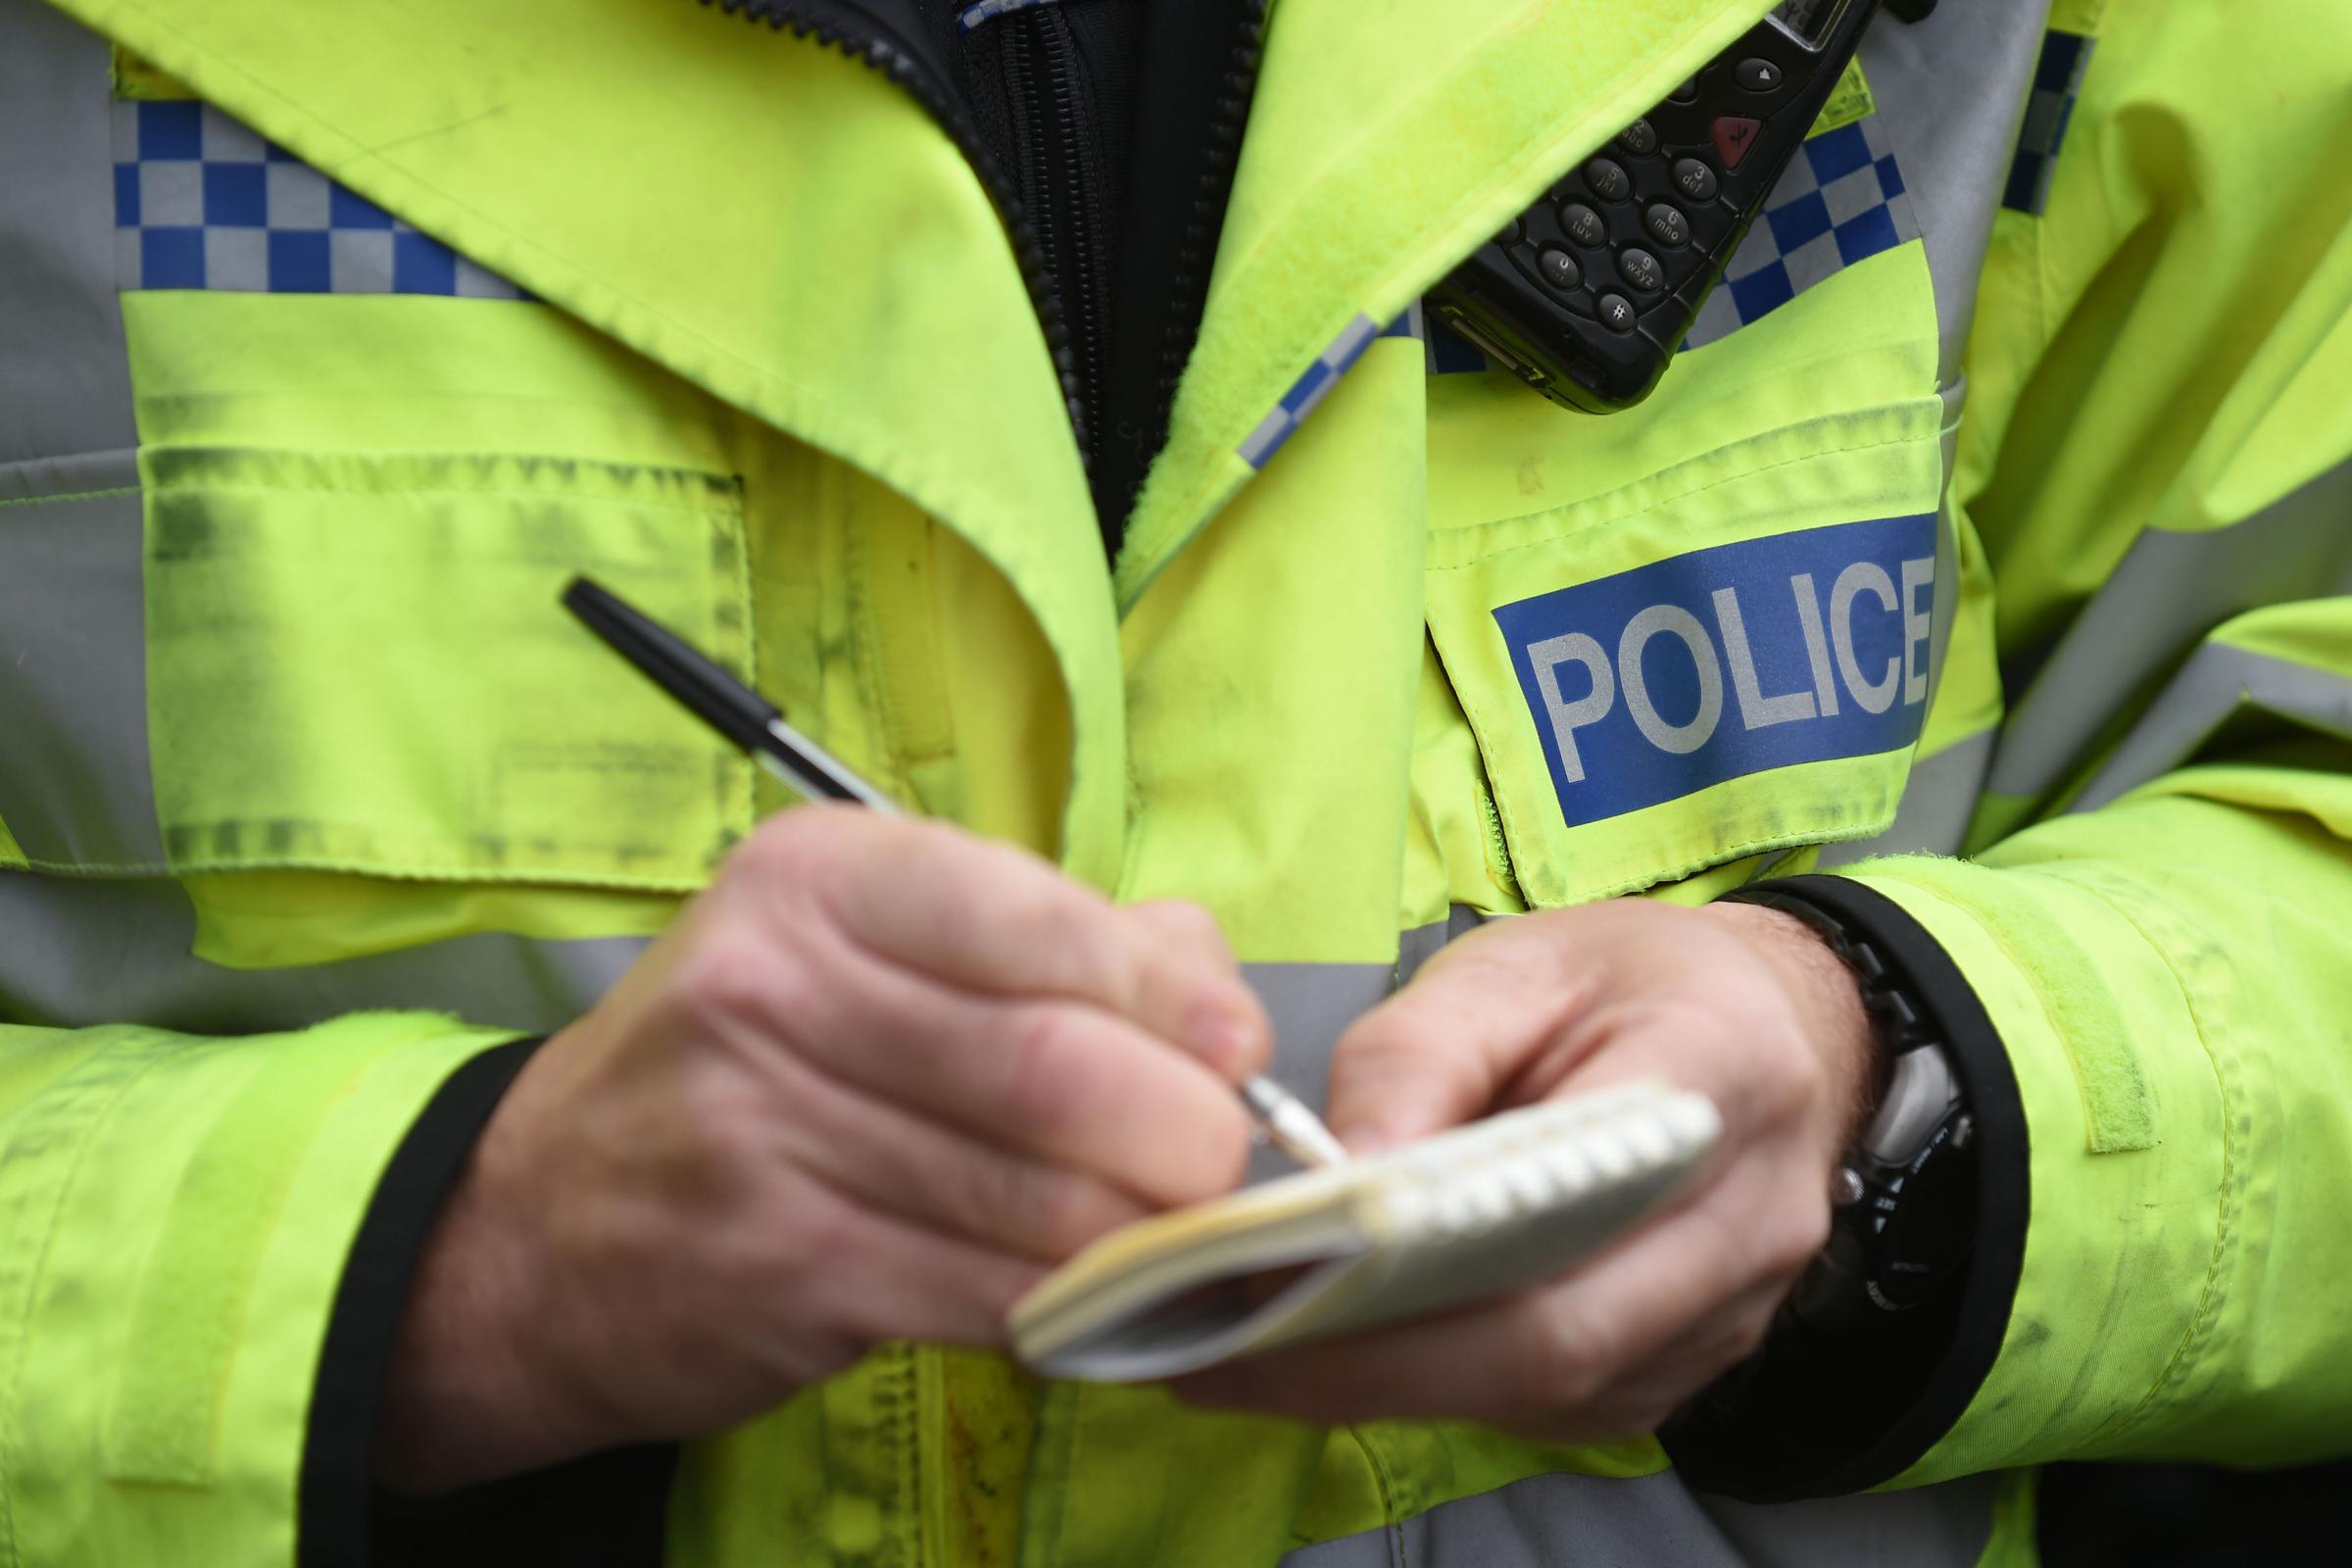 Bradford men arrested in connection with attempted carjacking - Bradford Telegraph and Argus